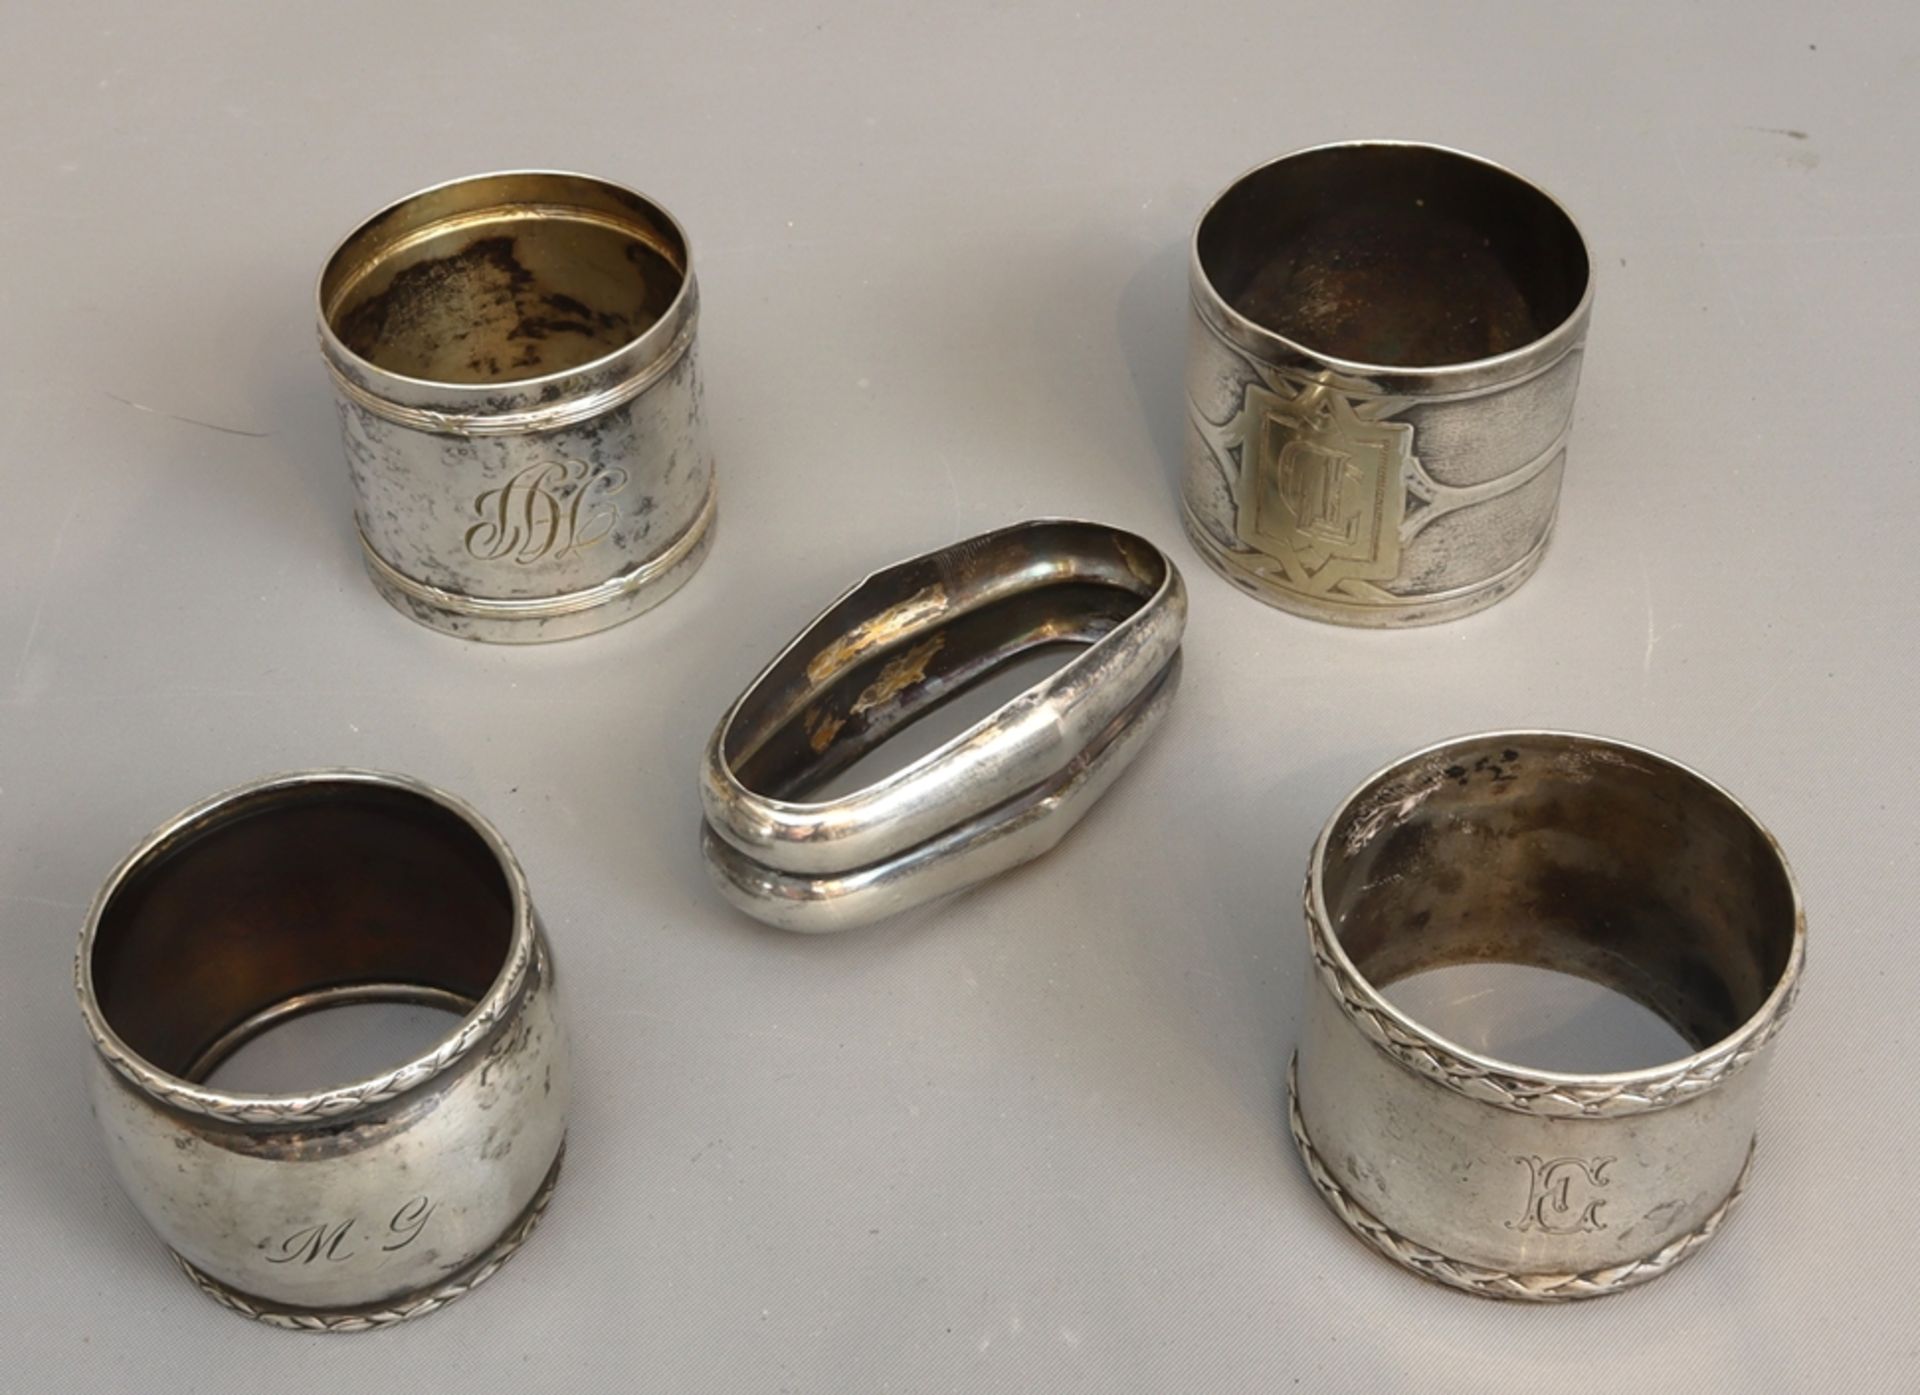 Lot of silver napkin rings, Historism to 30s, German - Image 3 of 4